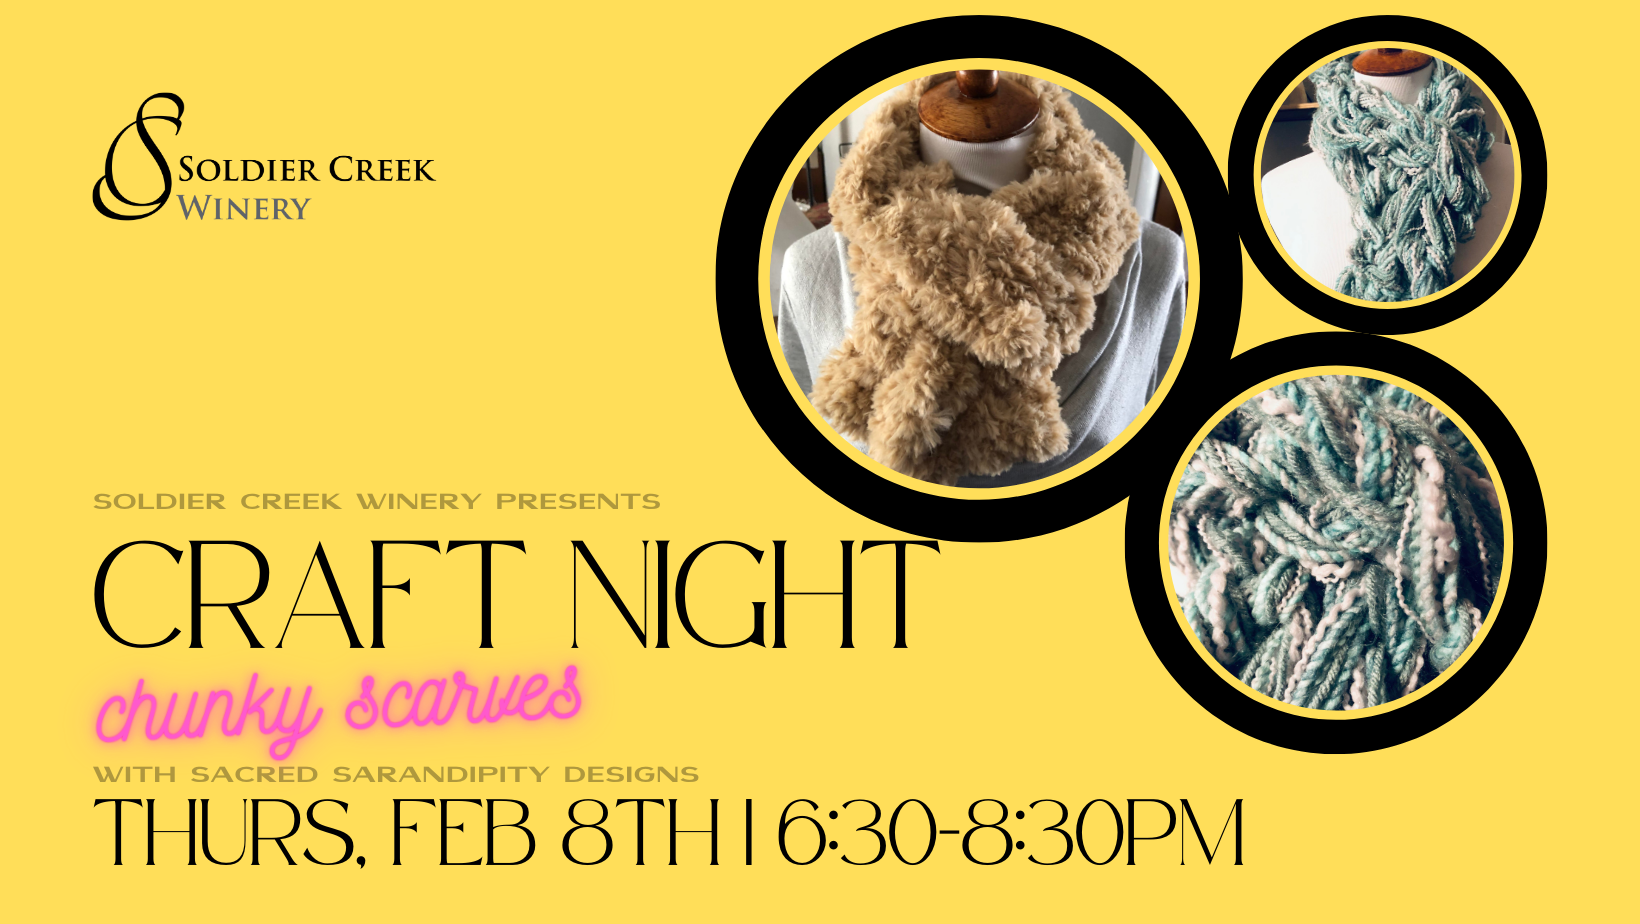 craft night at soldier creek winery on thursday, february 8th from 6:30-8:30pm. make chunky scarves with sara of sacred sarandipity designs.